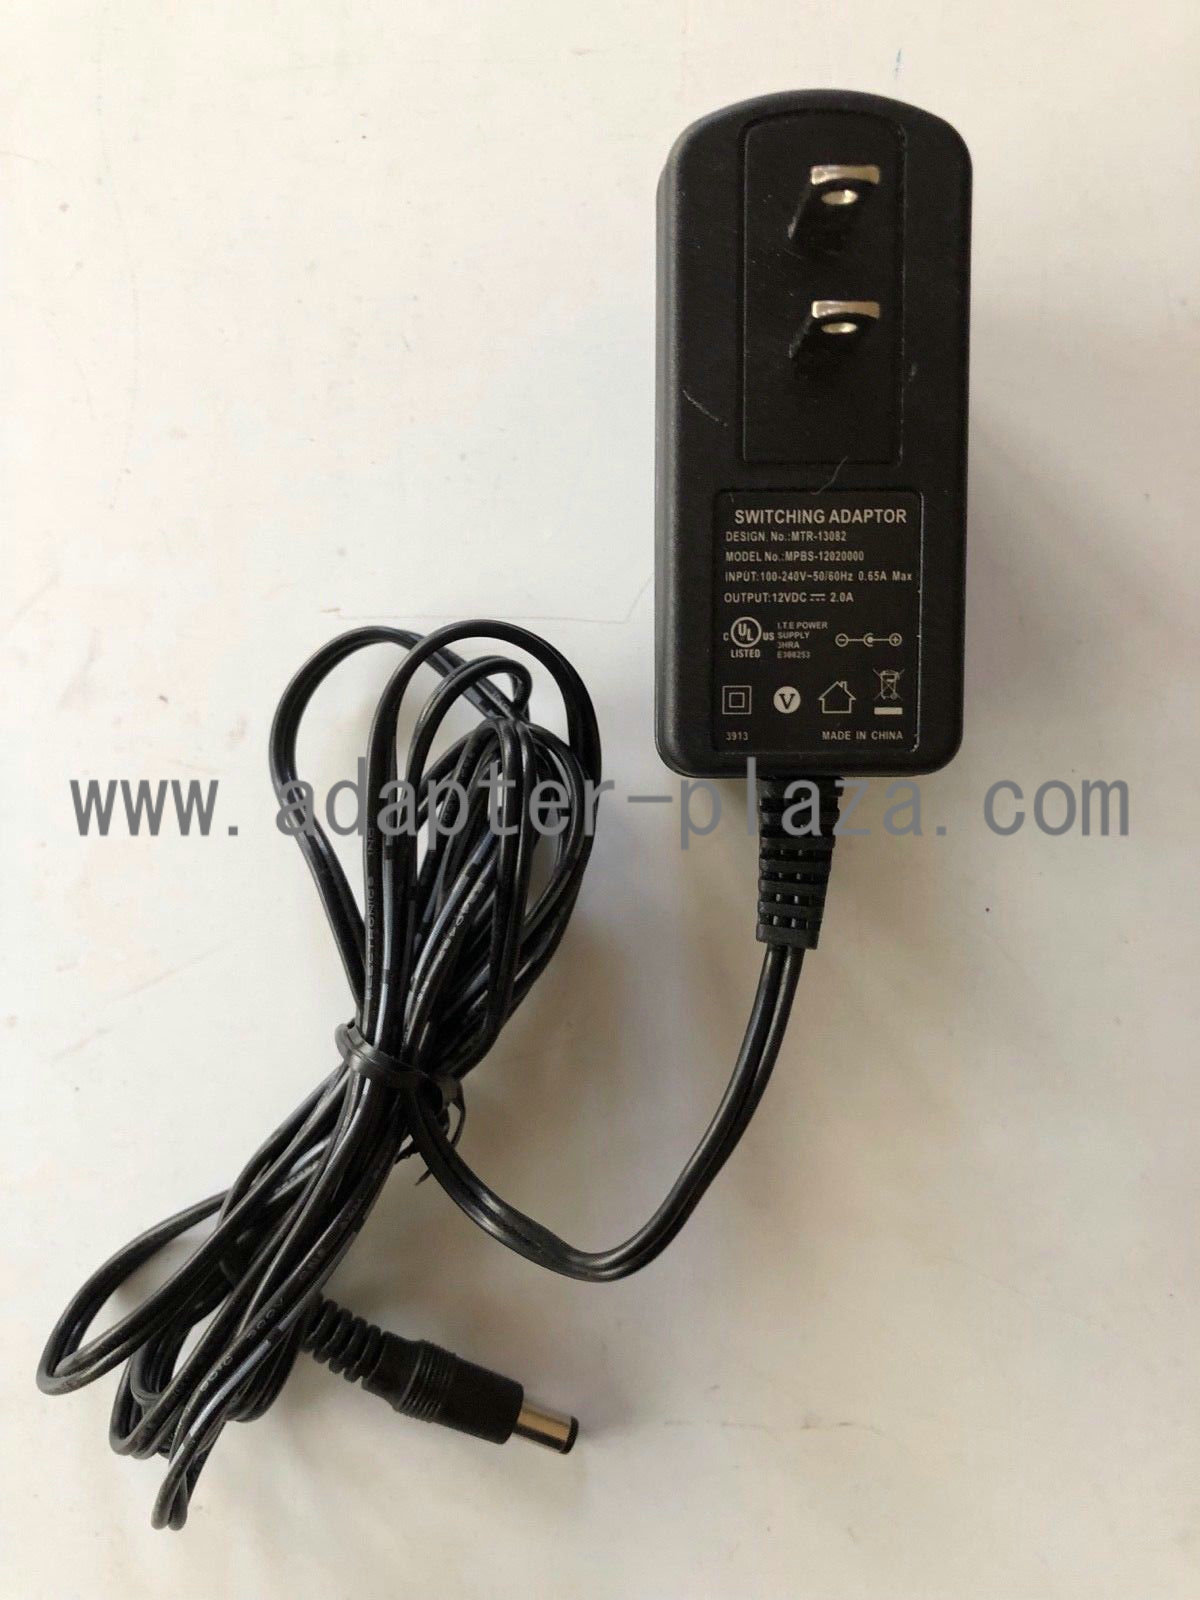 NEW MTR-13103 MPBS-12020000 Switching AC Adapter Power Supply Charger 12V 2A